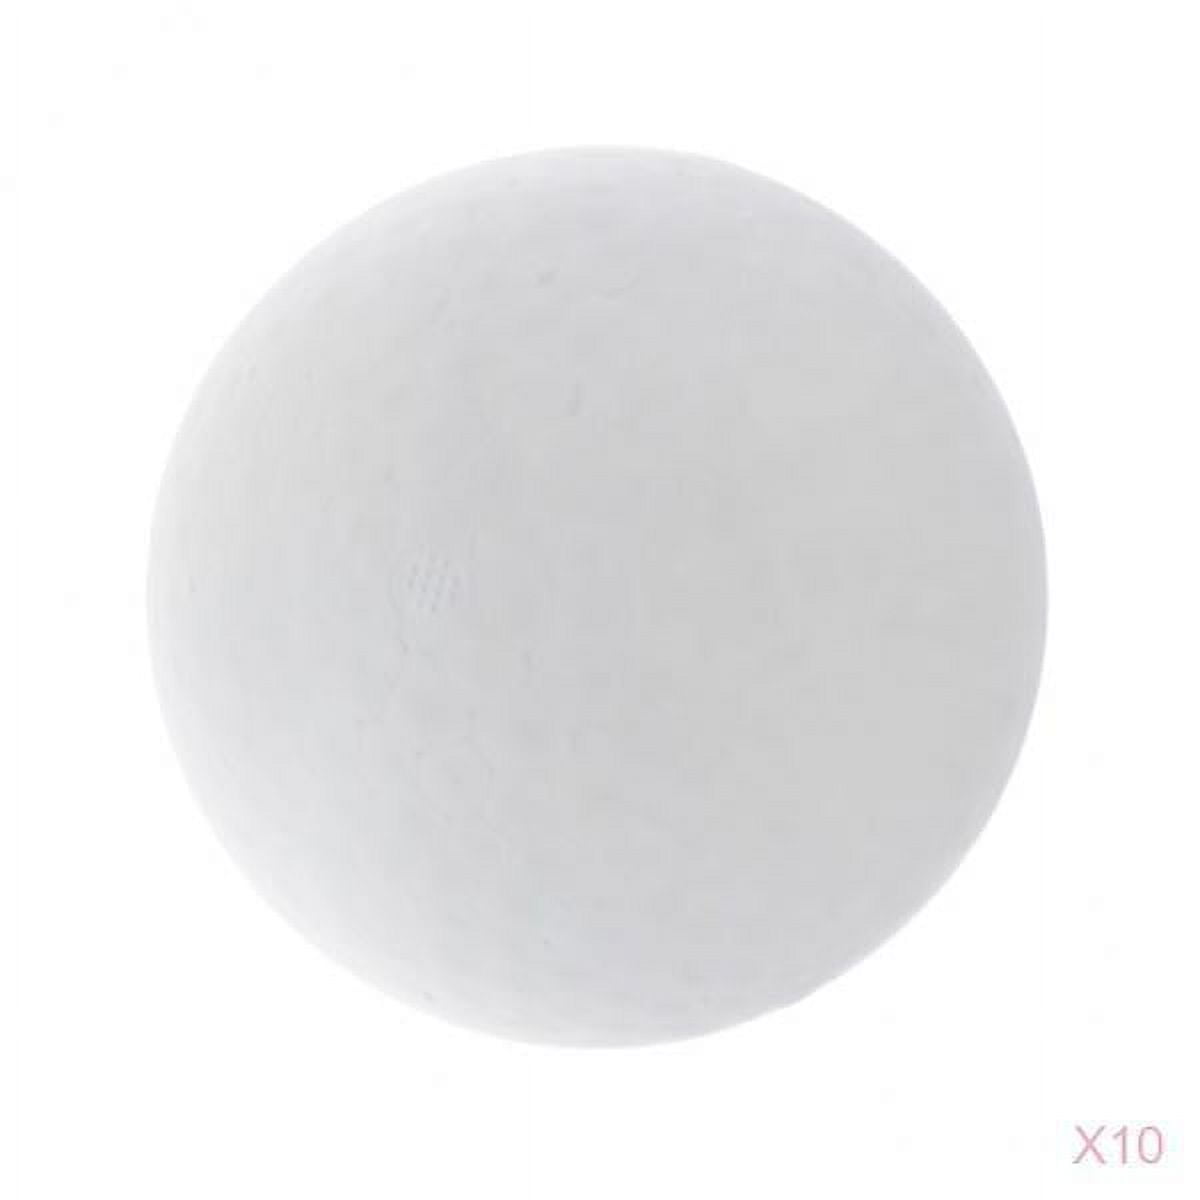  8 Inch Foam Circles For Crafts, 1 Inch Thick Round  Polystyrene Discs For DIY Projects